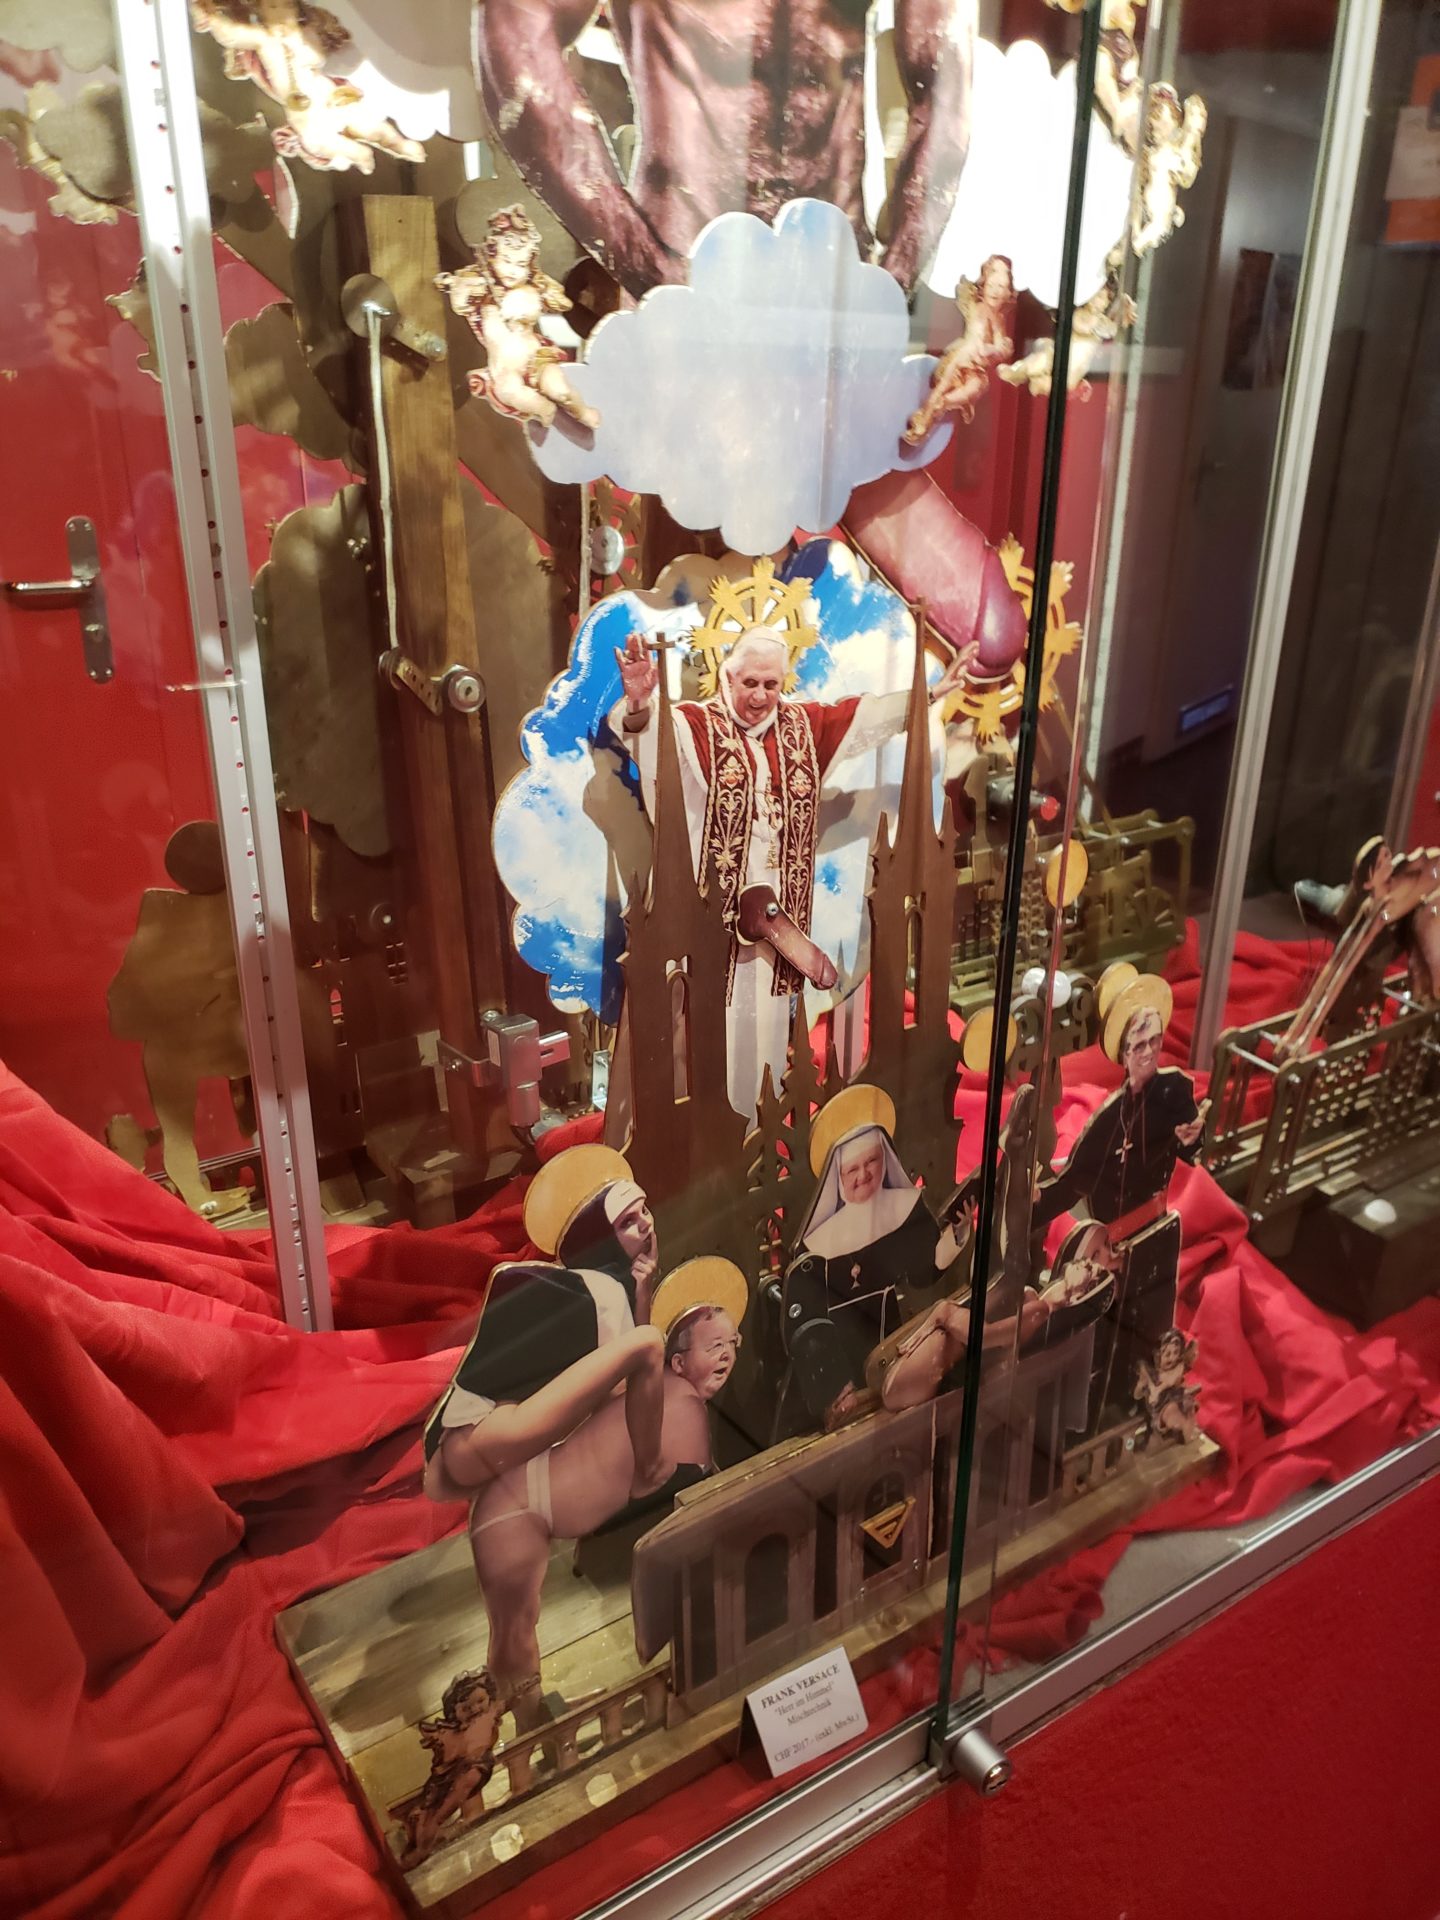 a display case with a cut out of a cardboard cutout of a religious figure